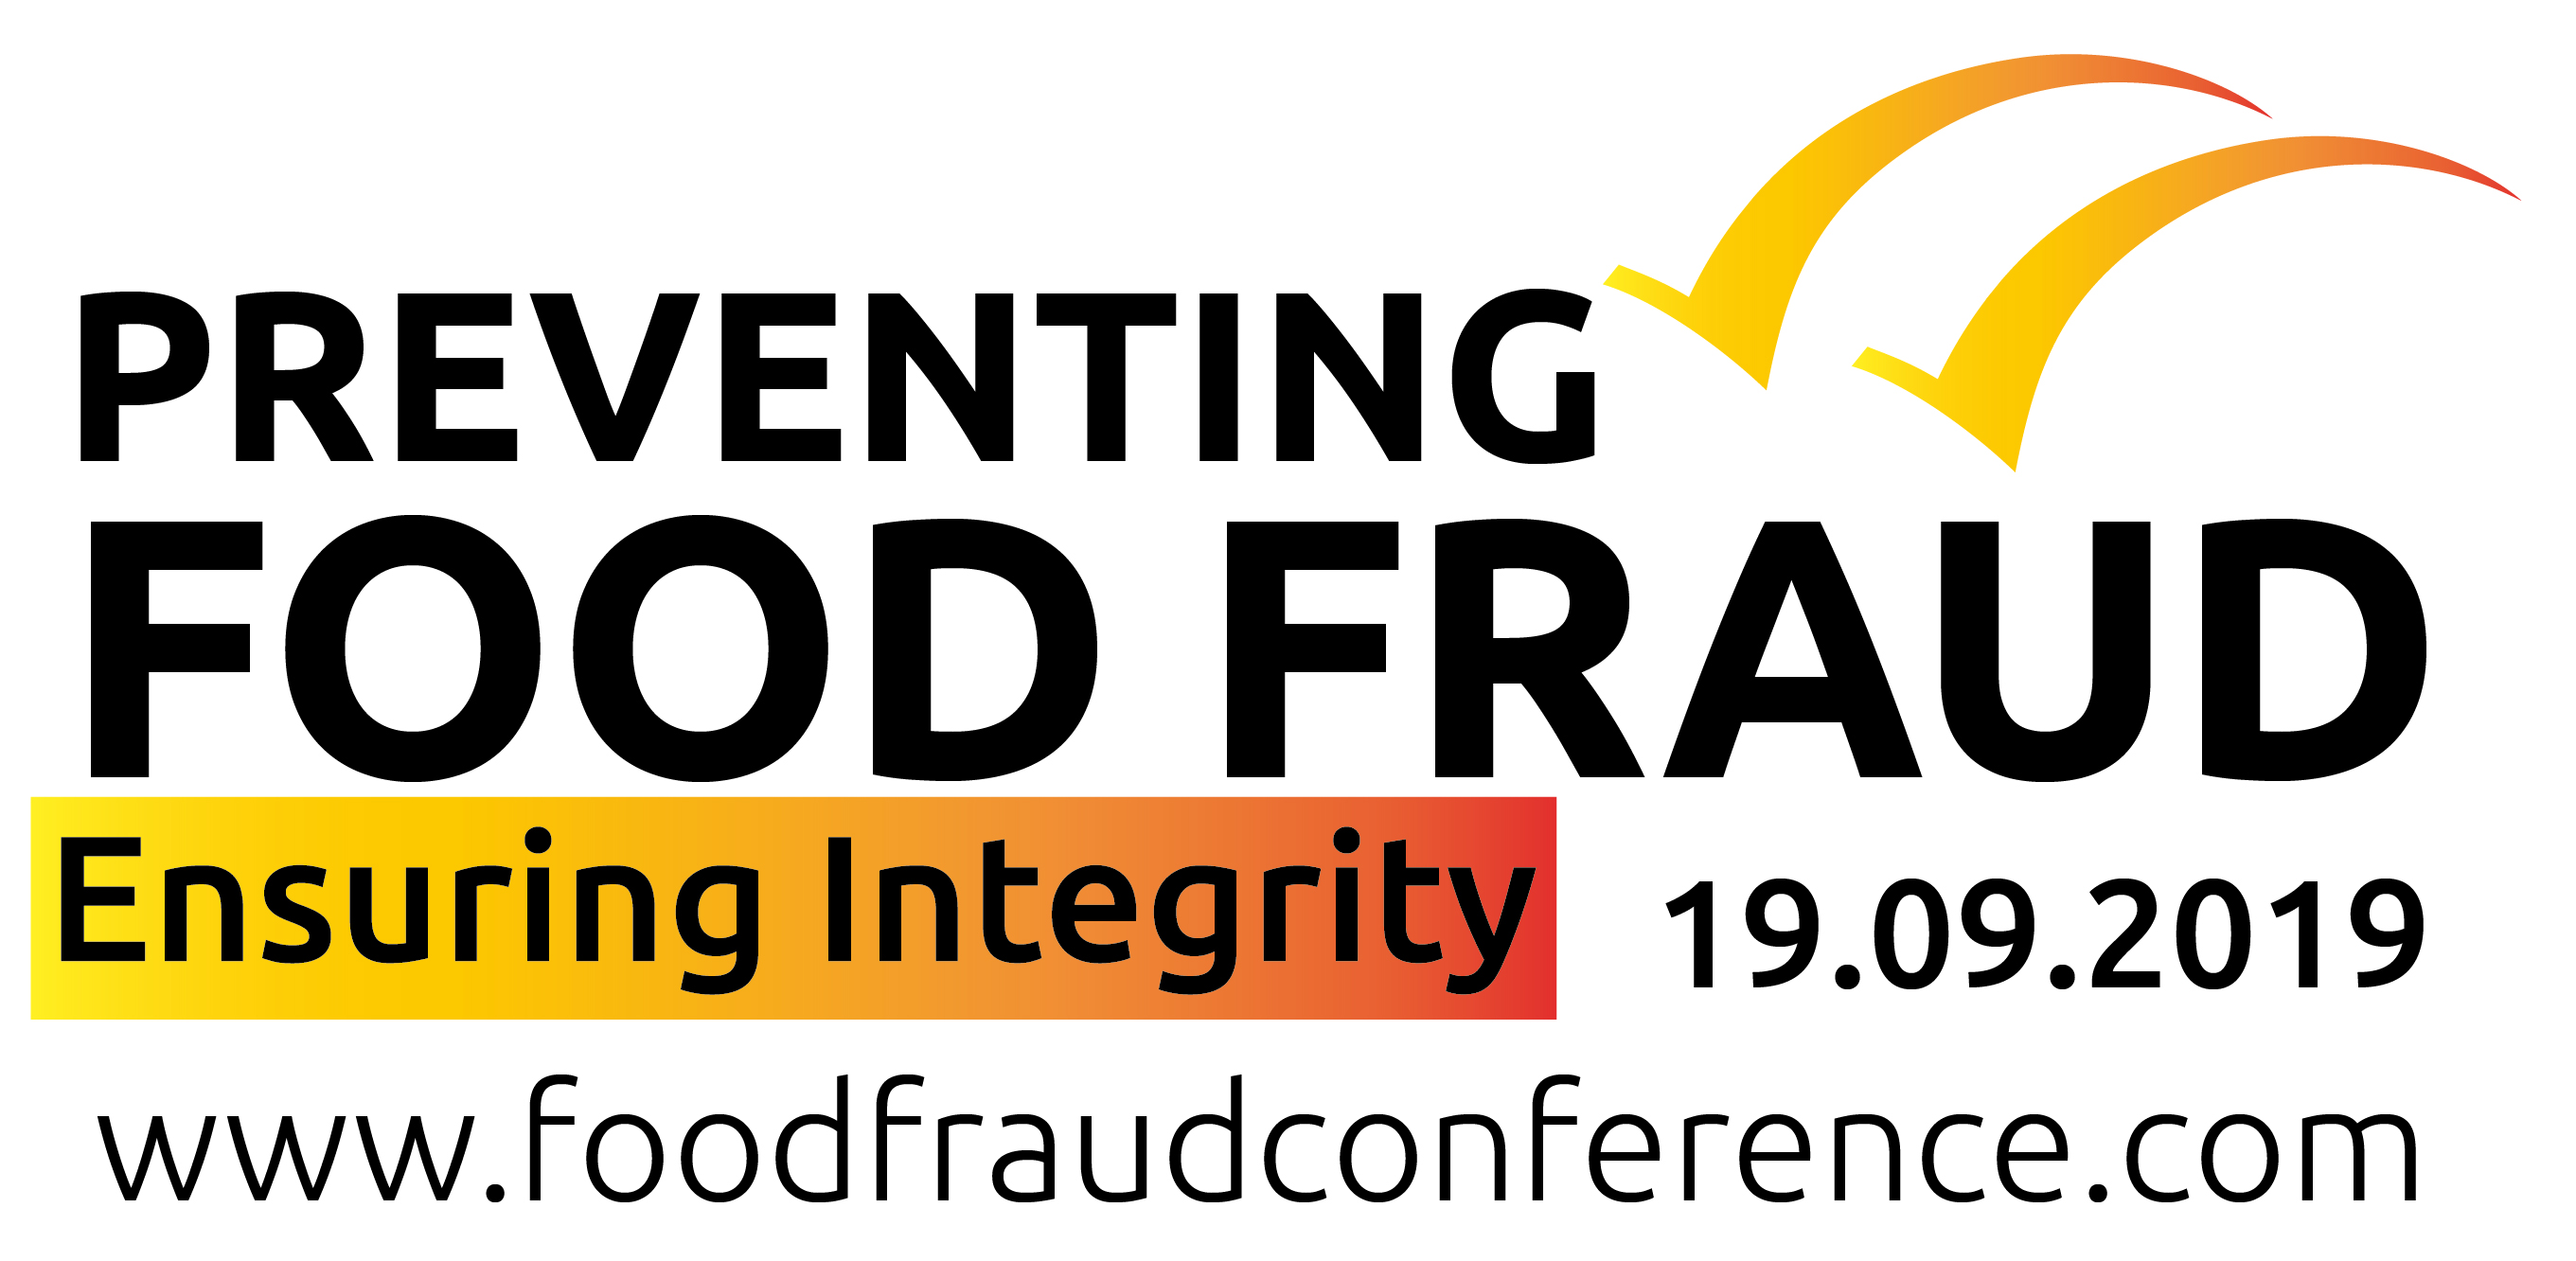 The Preventing Food Fraud Day